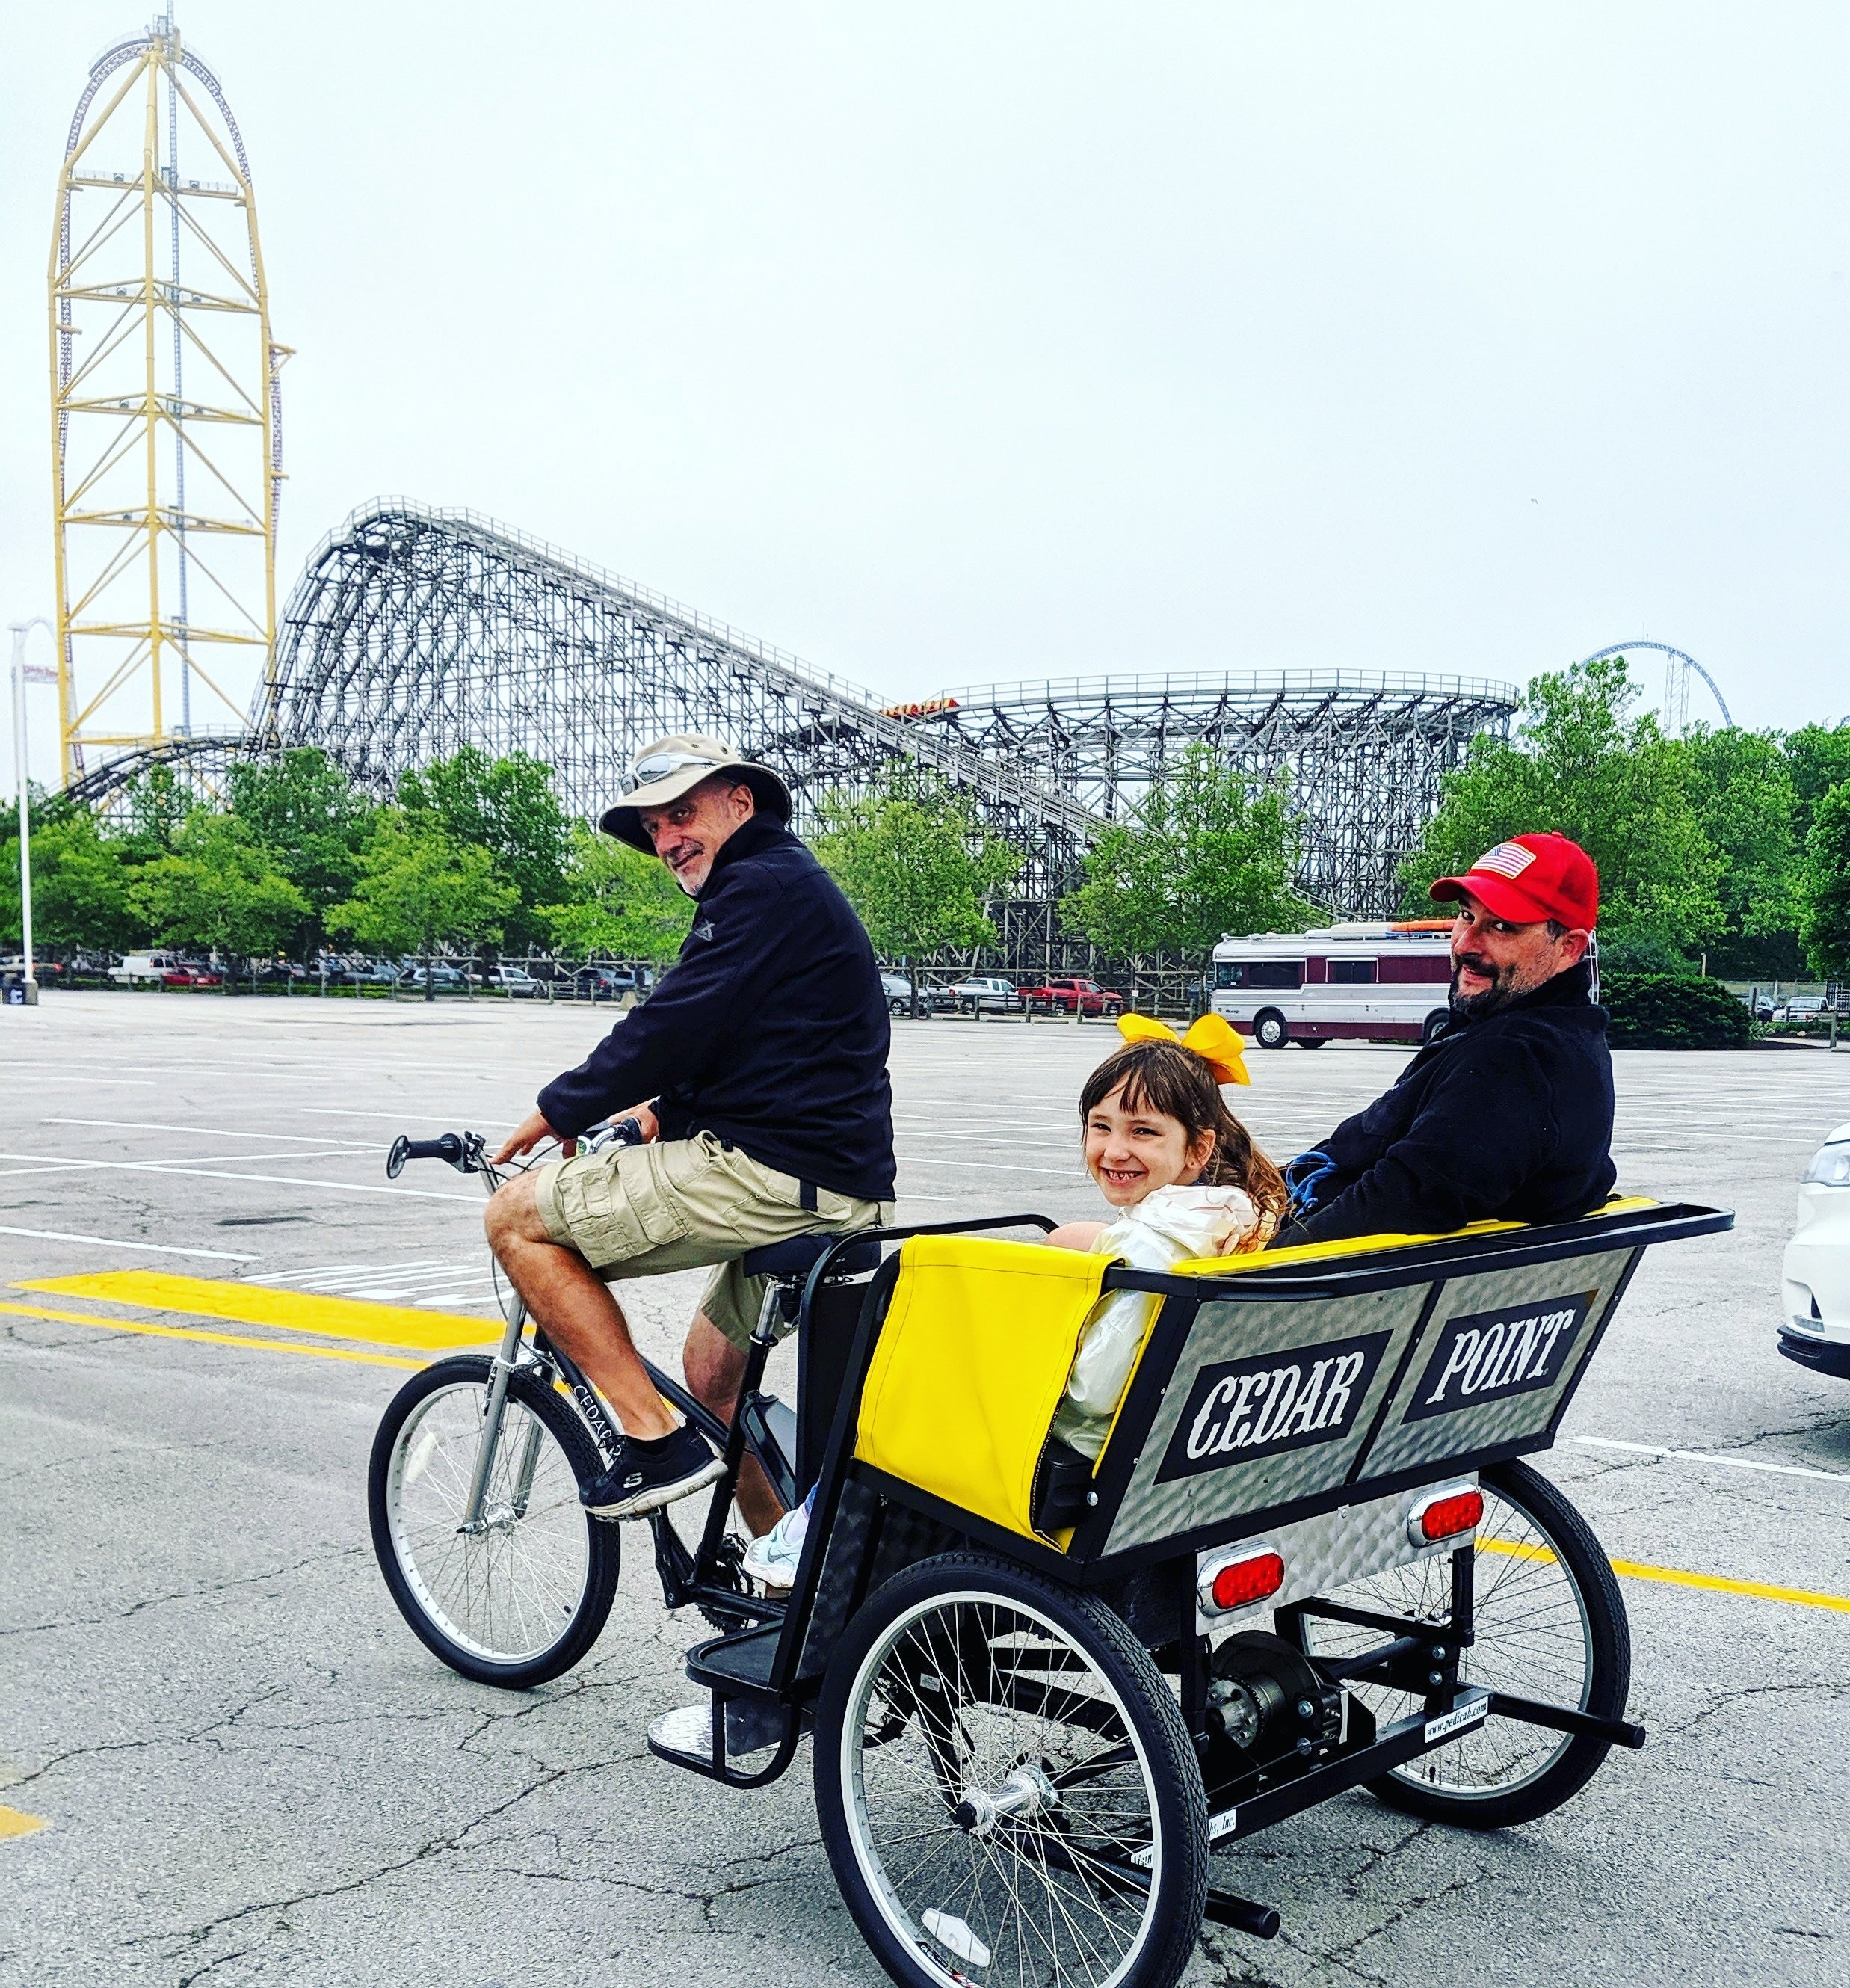 Rickshaw ride from the campground to roller coasters